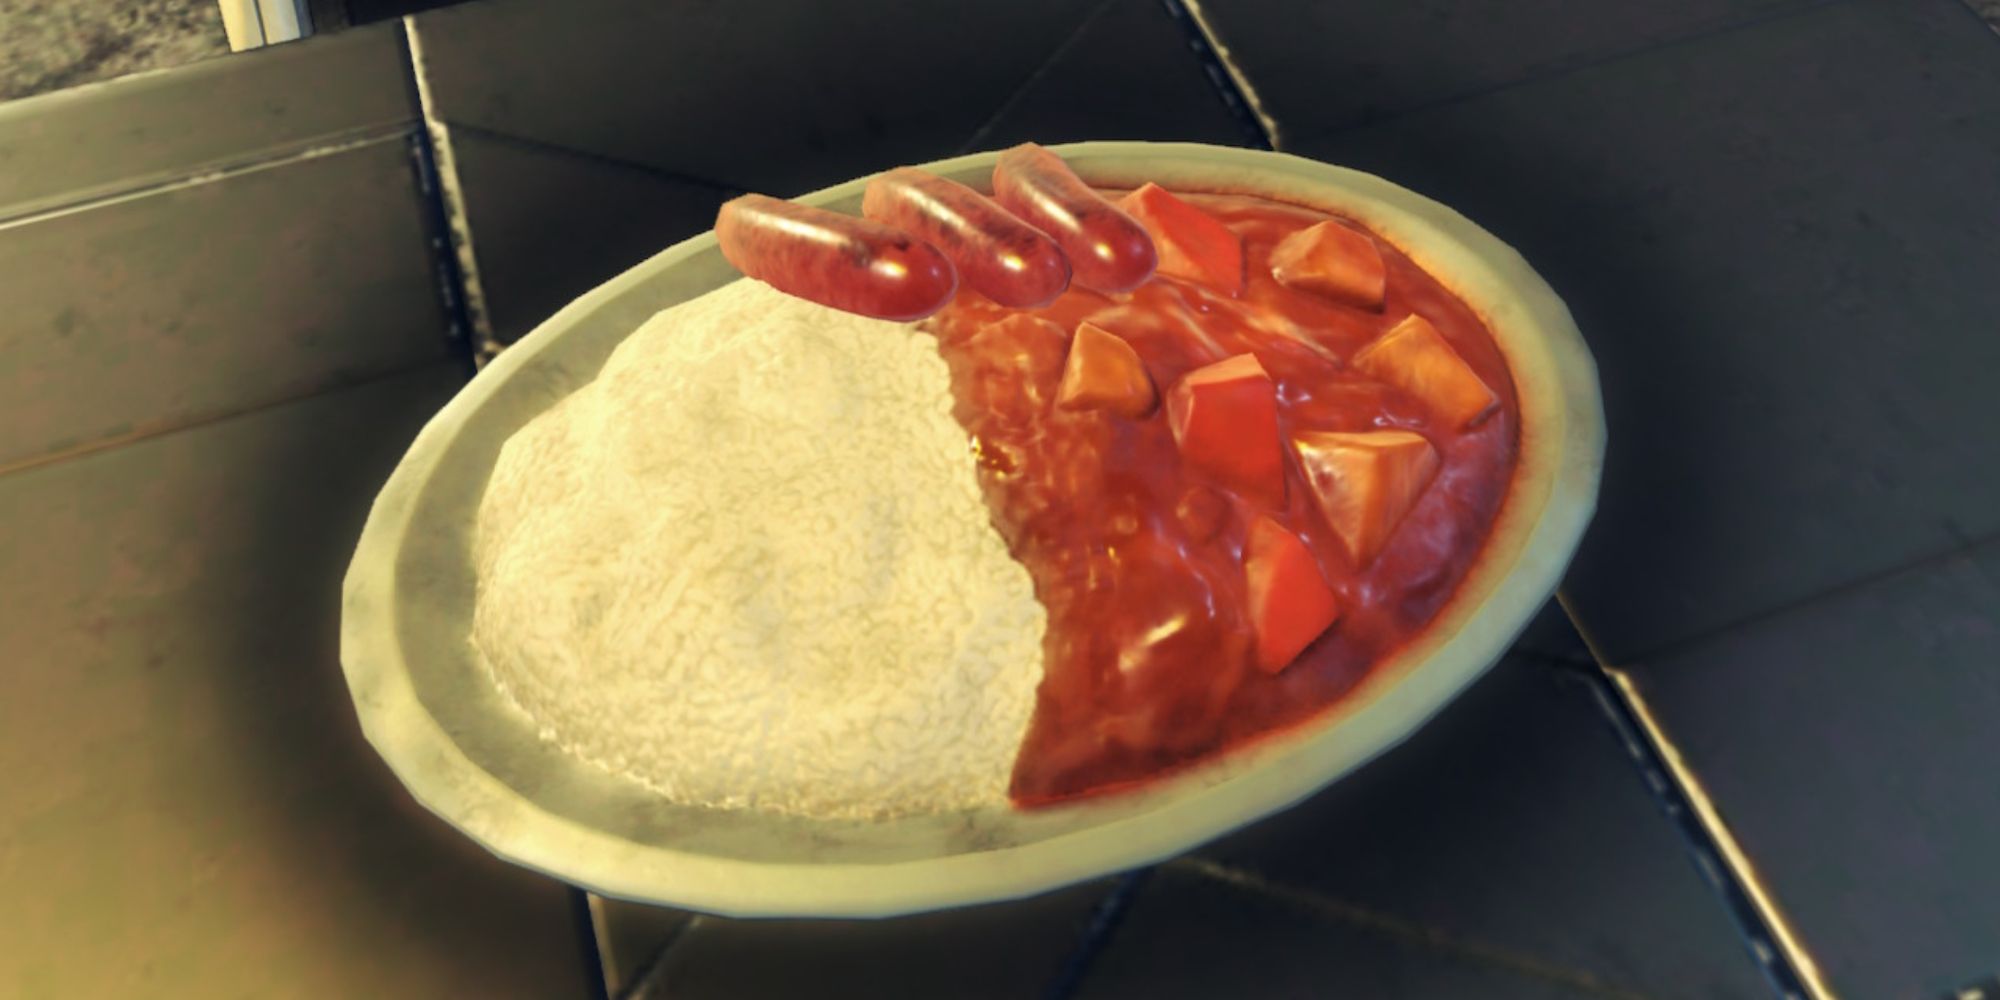 The Monicurry Special Meal in Xenoblade Chronicles 3